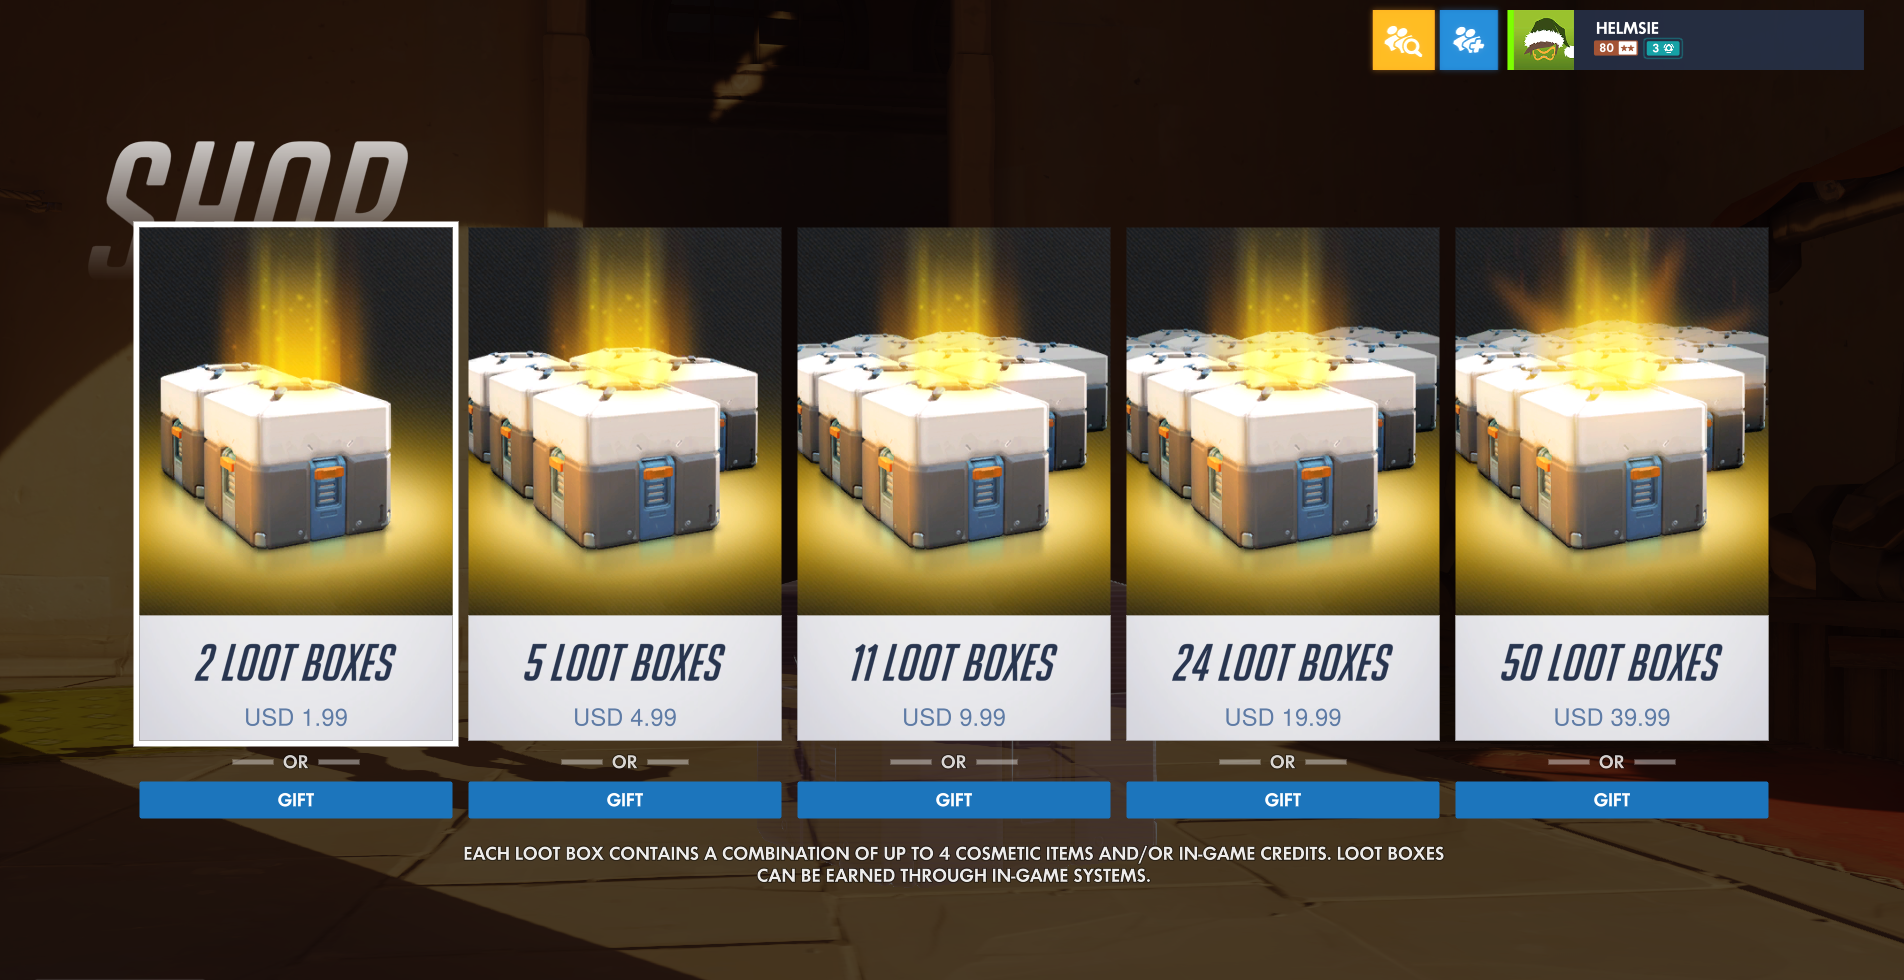 microtransactions in video games - Cund 2 Loot Boxes 5 Loot Boxes 11 Loot Boxes 24 Loot Boxes 50 Loot Boxes Usd 1.90 Usd 4.00 Usd 9.99 Usd 19.90 Usd 39.99 Om 04 Or Gif Gife Gift Gift Gift Each Loot Box Contains A Combination Of Up To 4 Cosmetic Items AndO